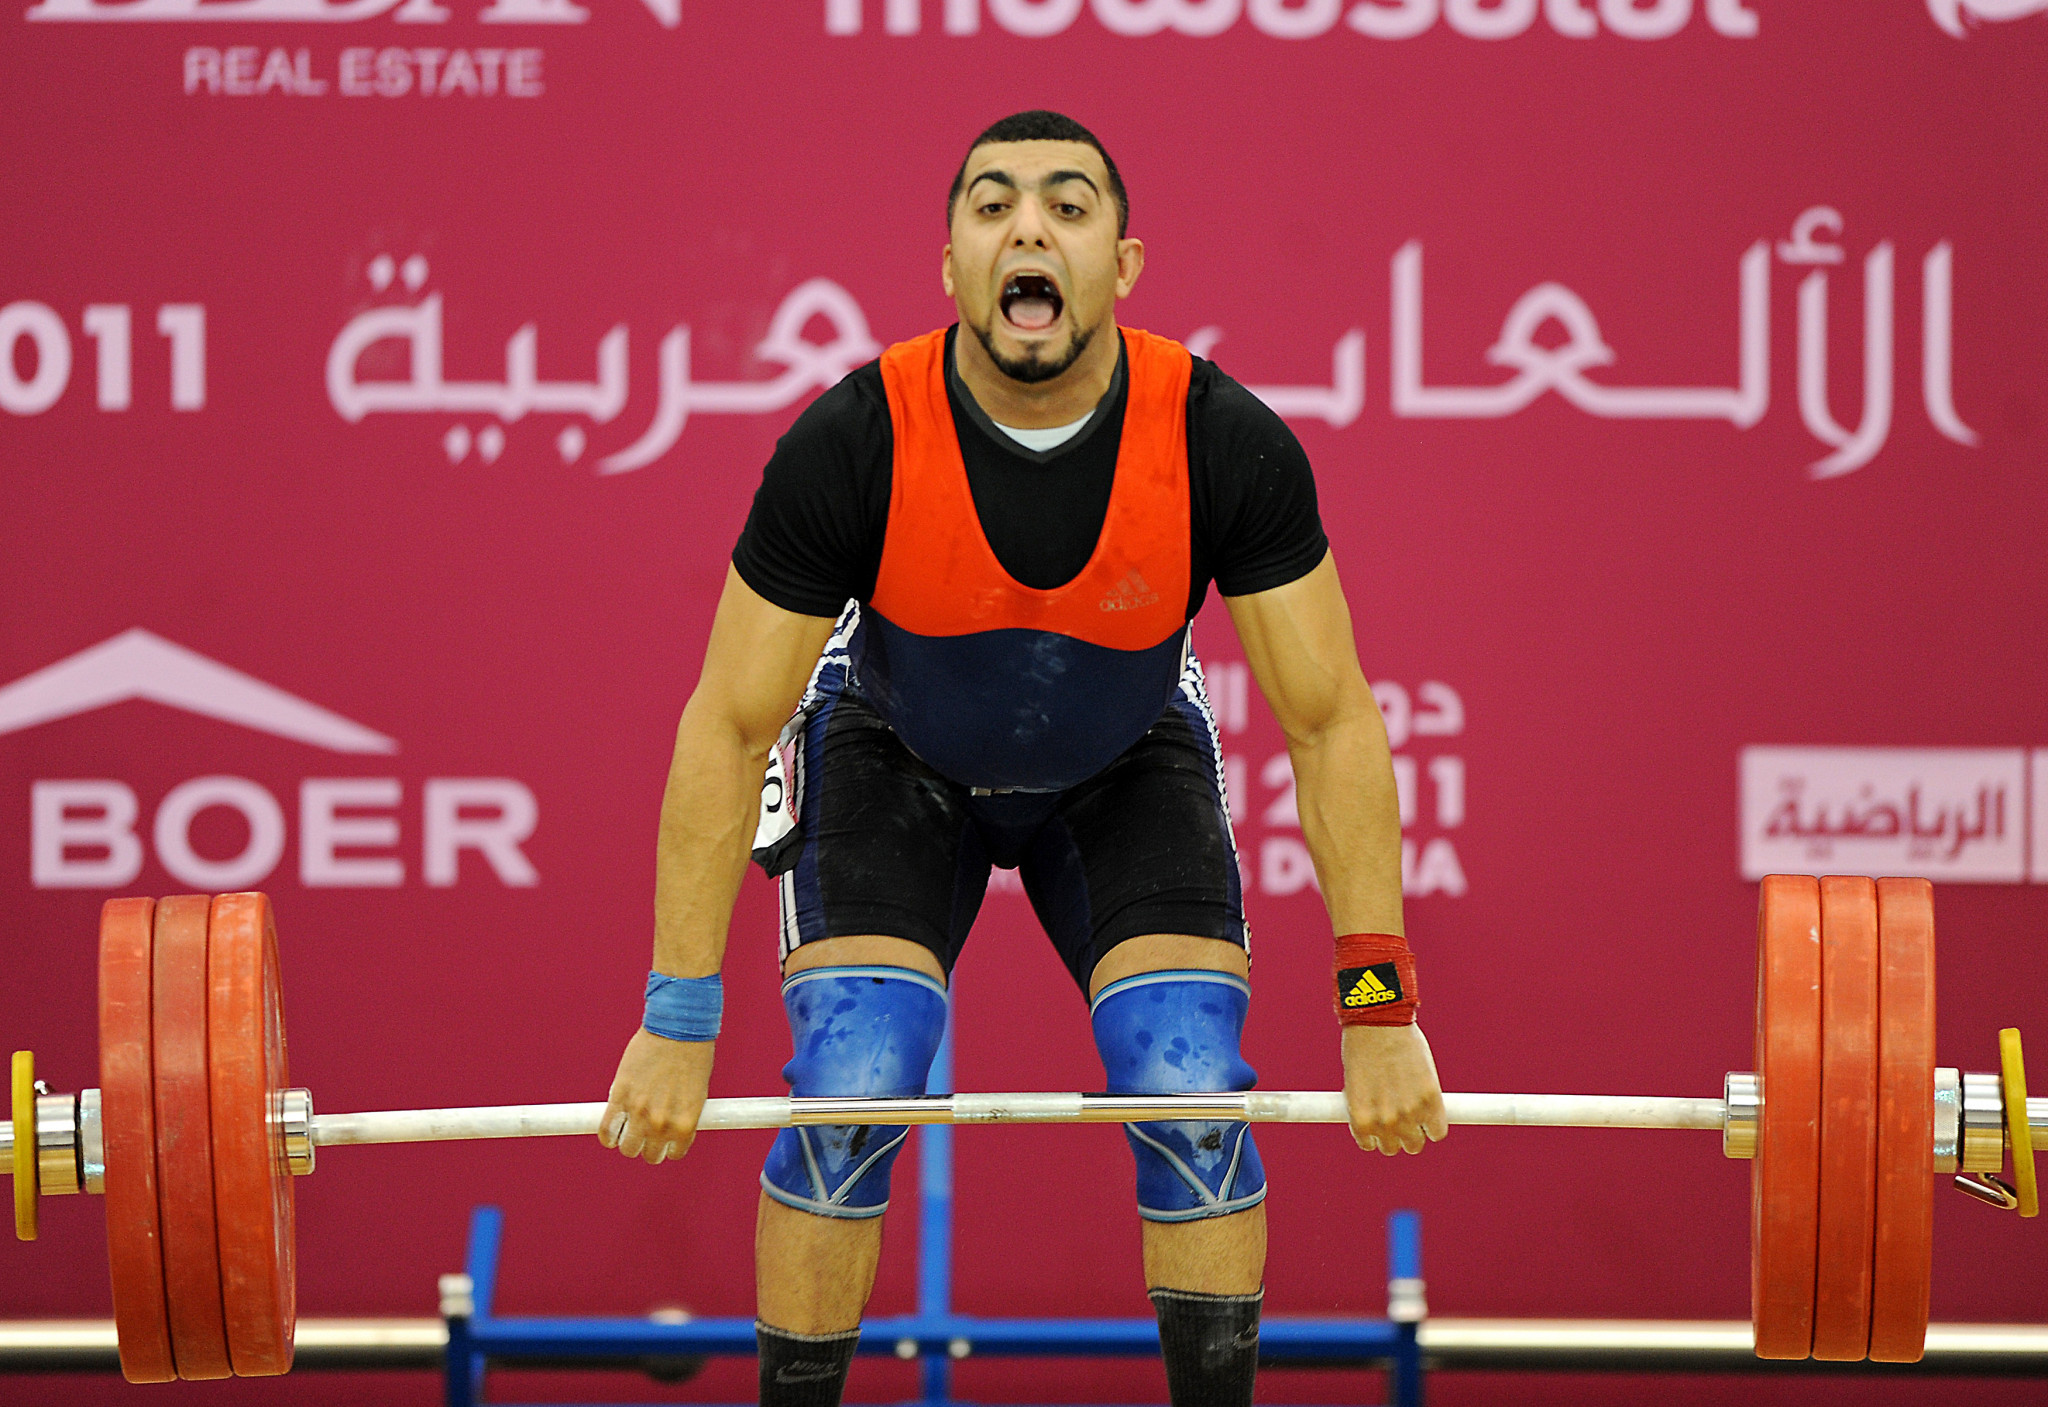 Saudi Arabian weightlifter provisionally suspended after failed drugs test